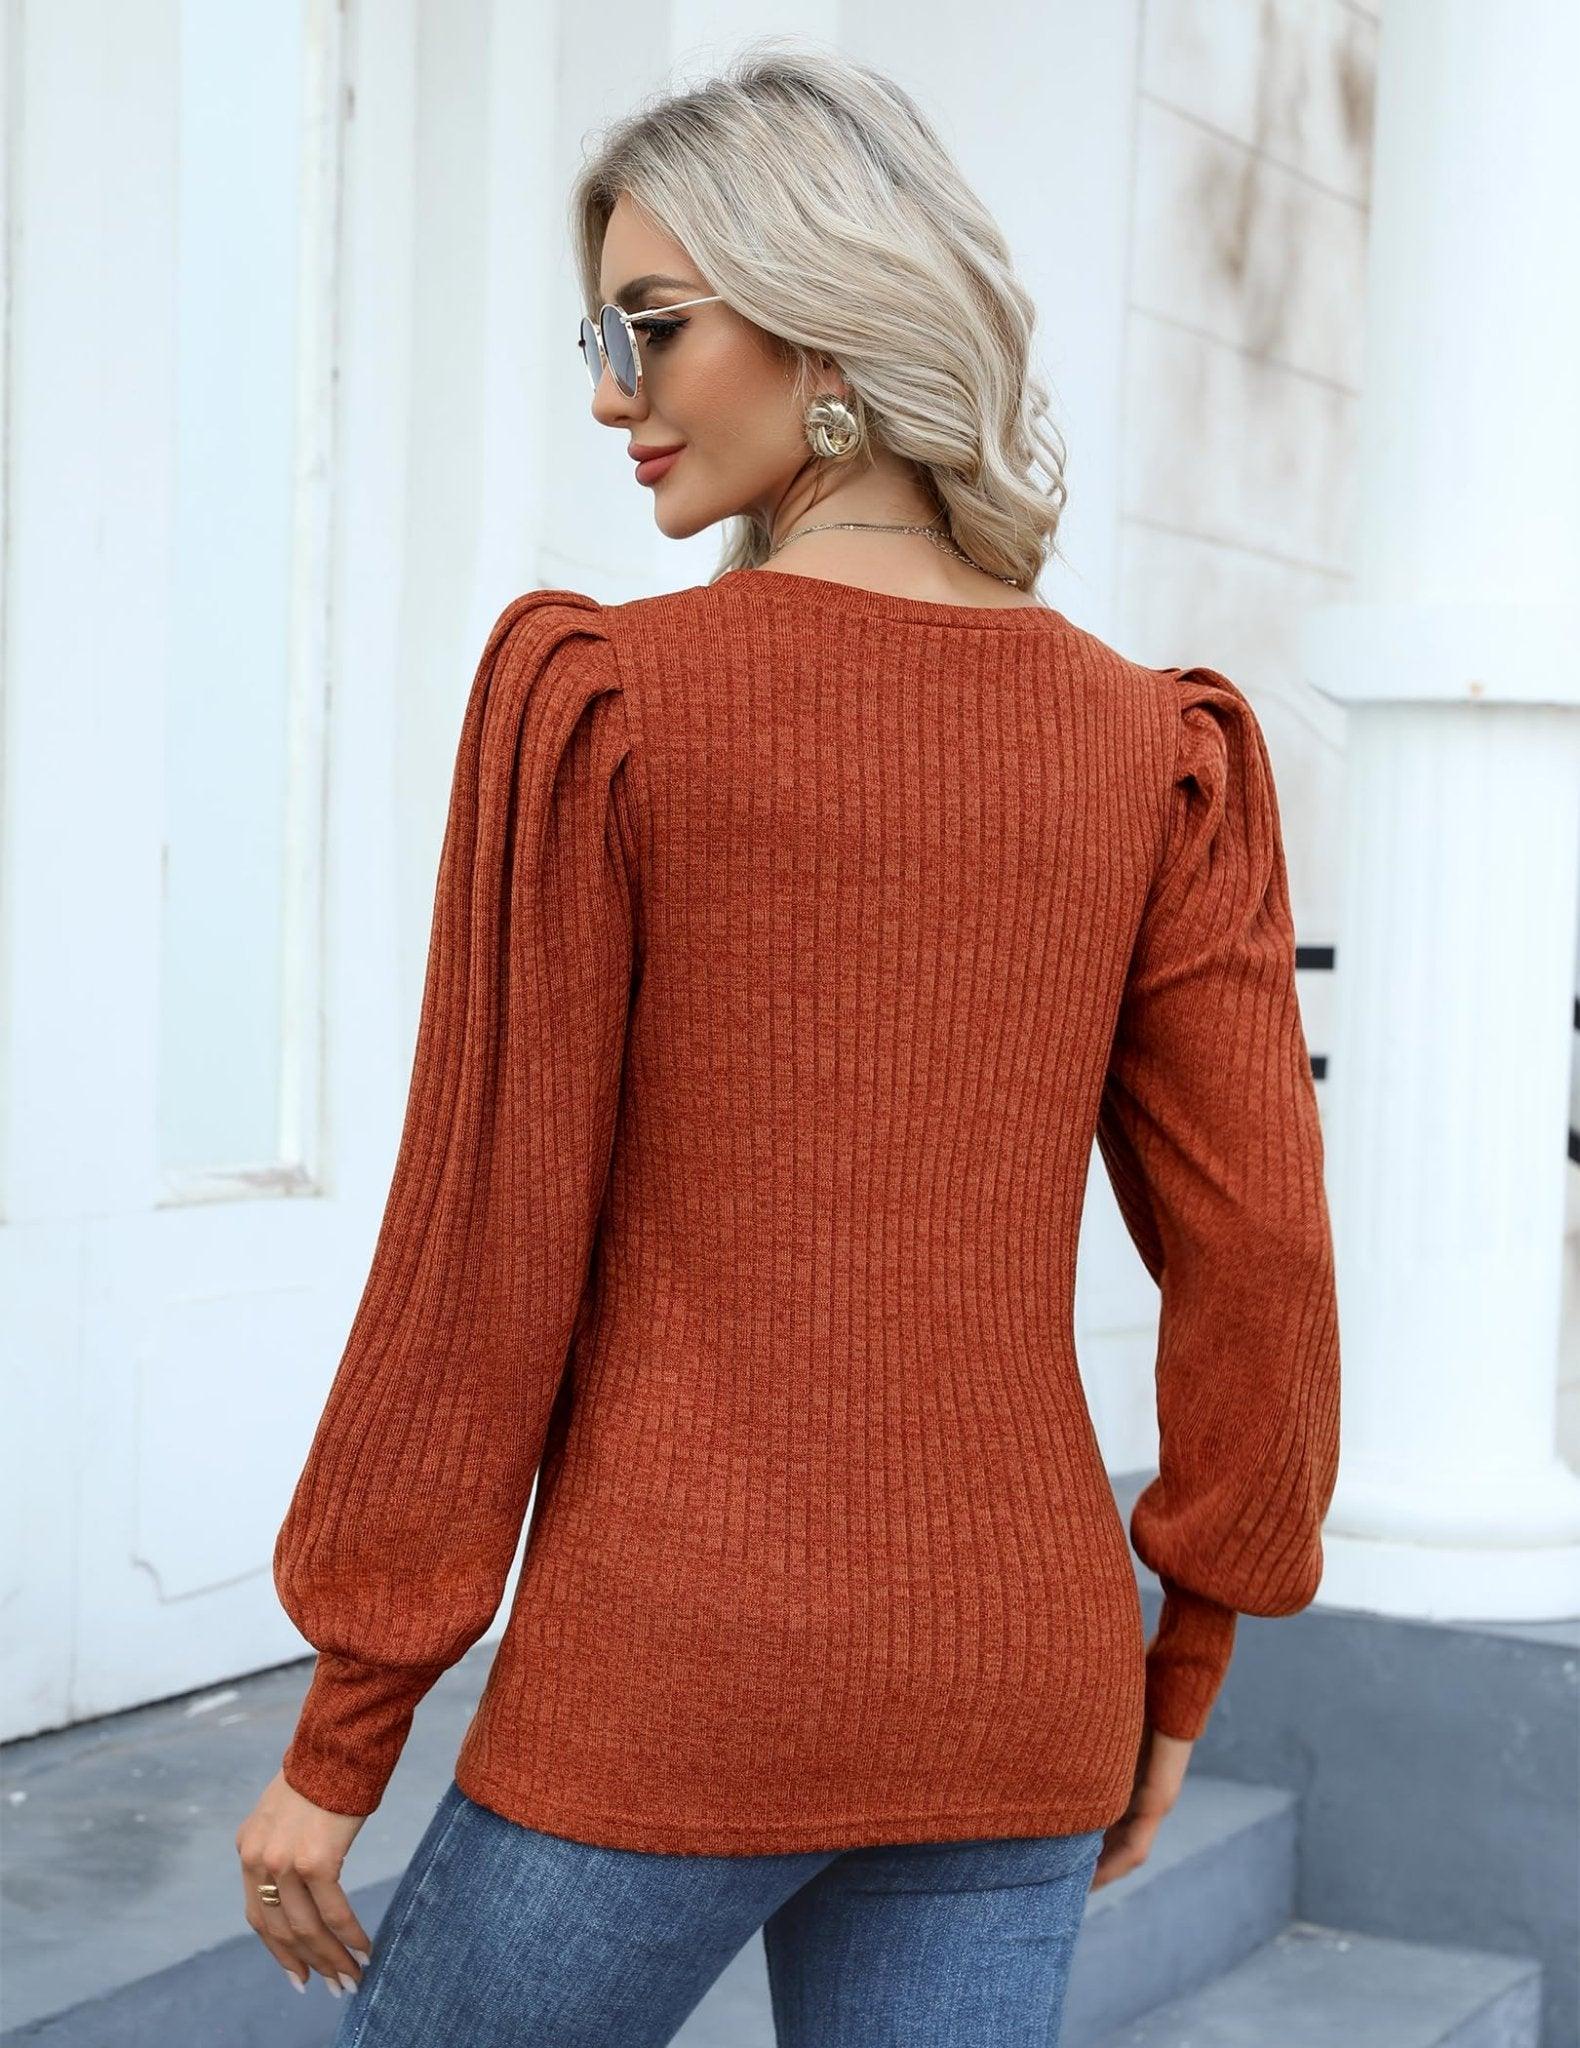 HOTOUCH Ladies Knitted Shirts Cute Puff Long Sleeve Blouse Tops Soft Round Neck Work Tunic Outefits Caramel M - Bona Fide Fashion